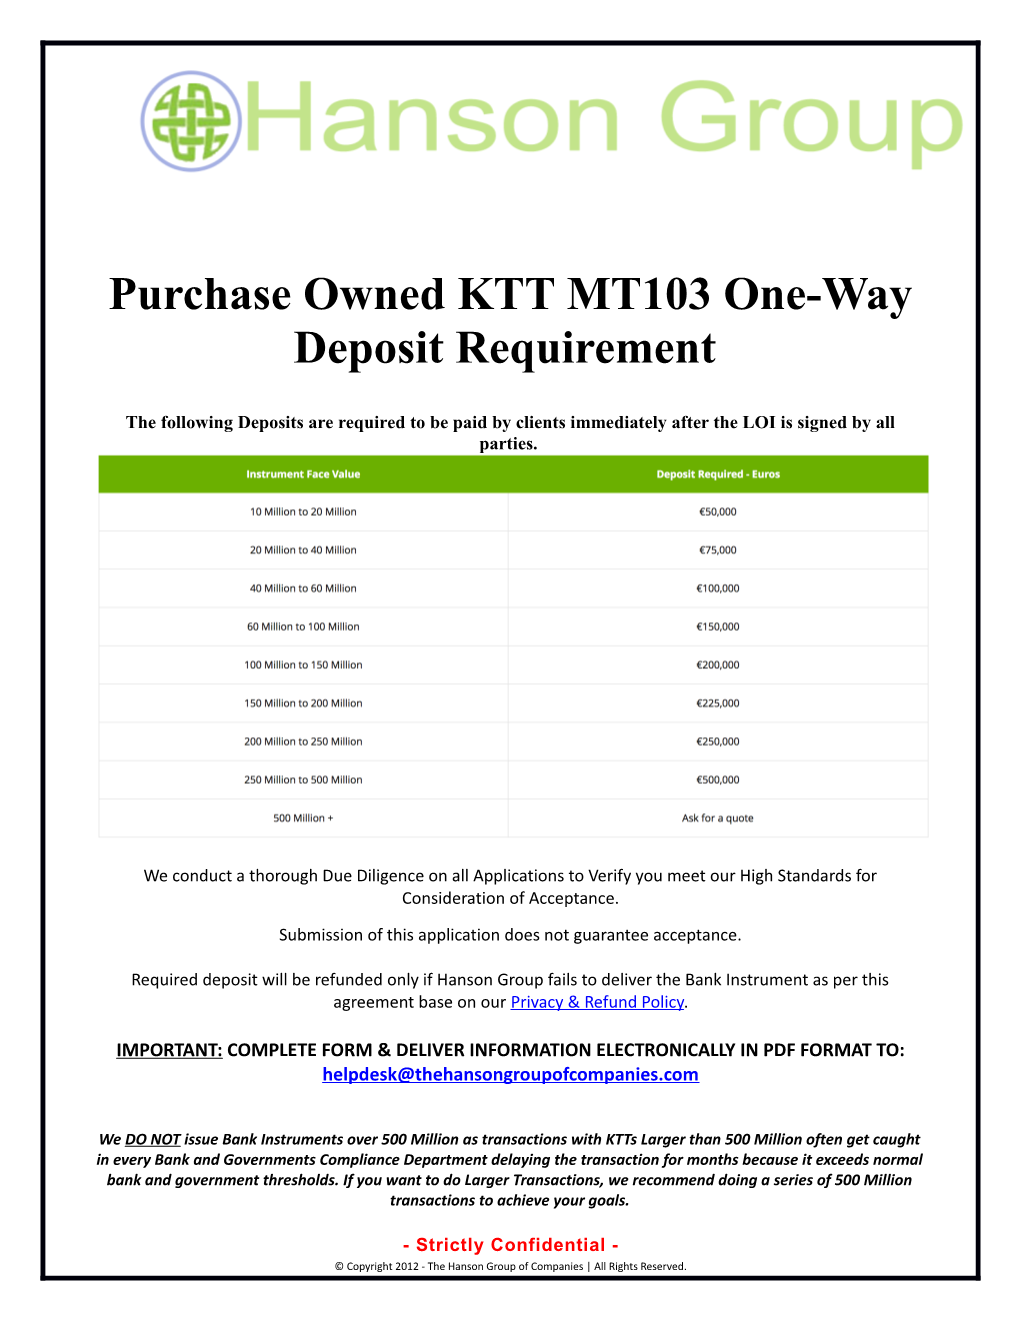 Purchase Ownedktt MT103 One-Way Deposit Requirement